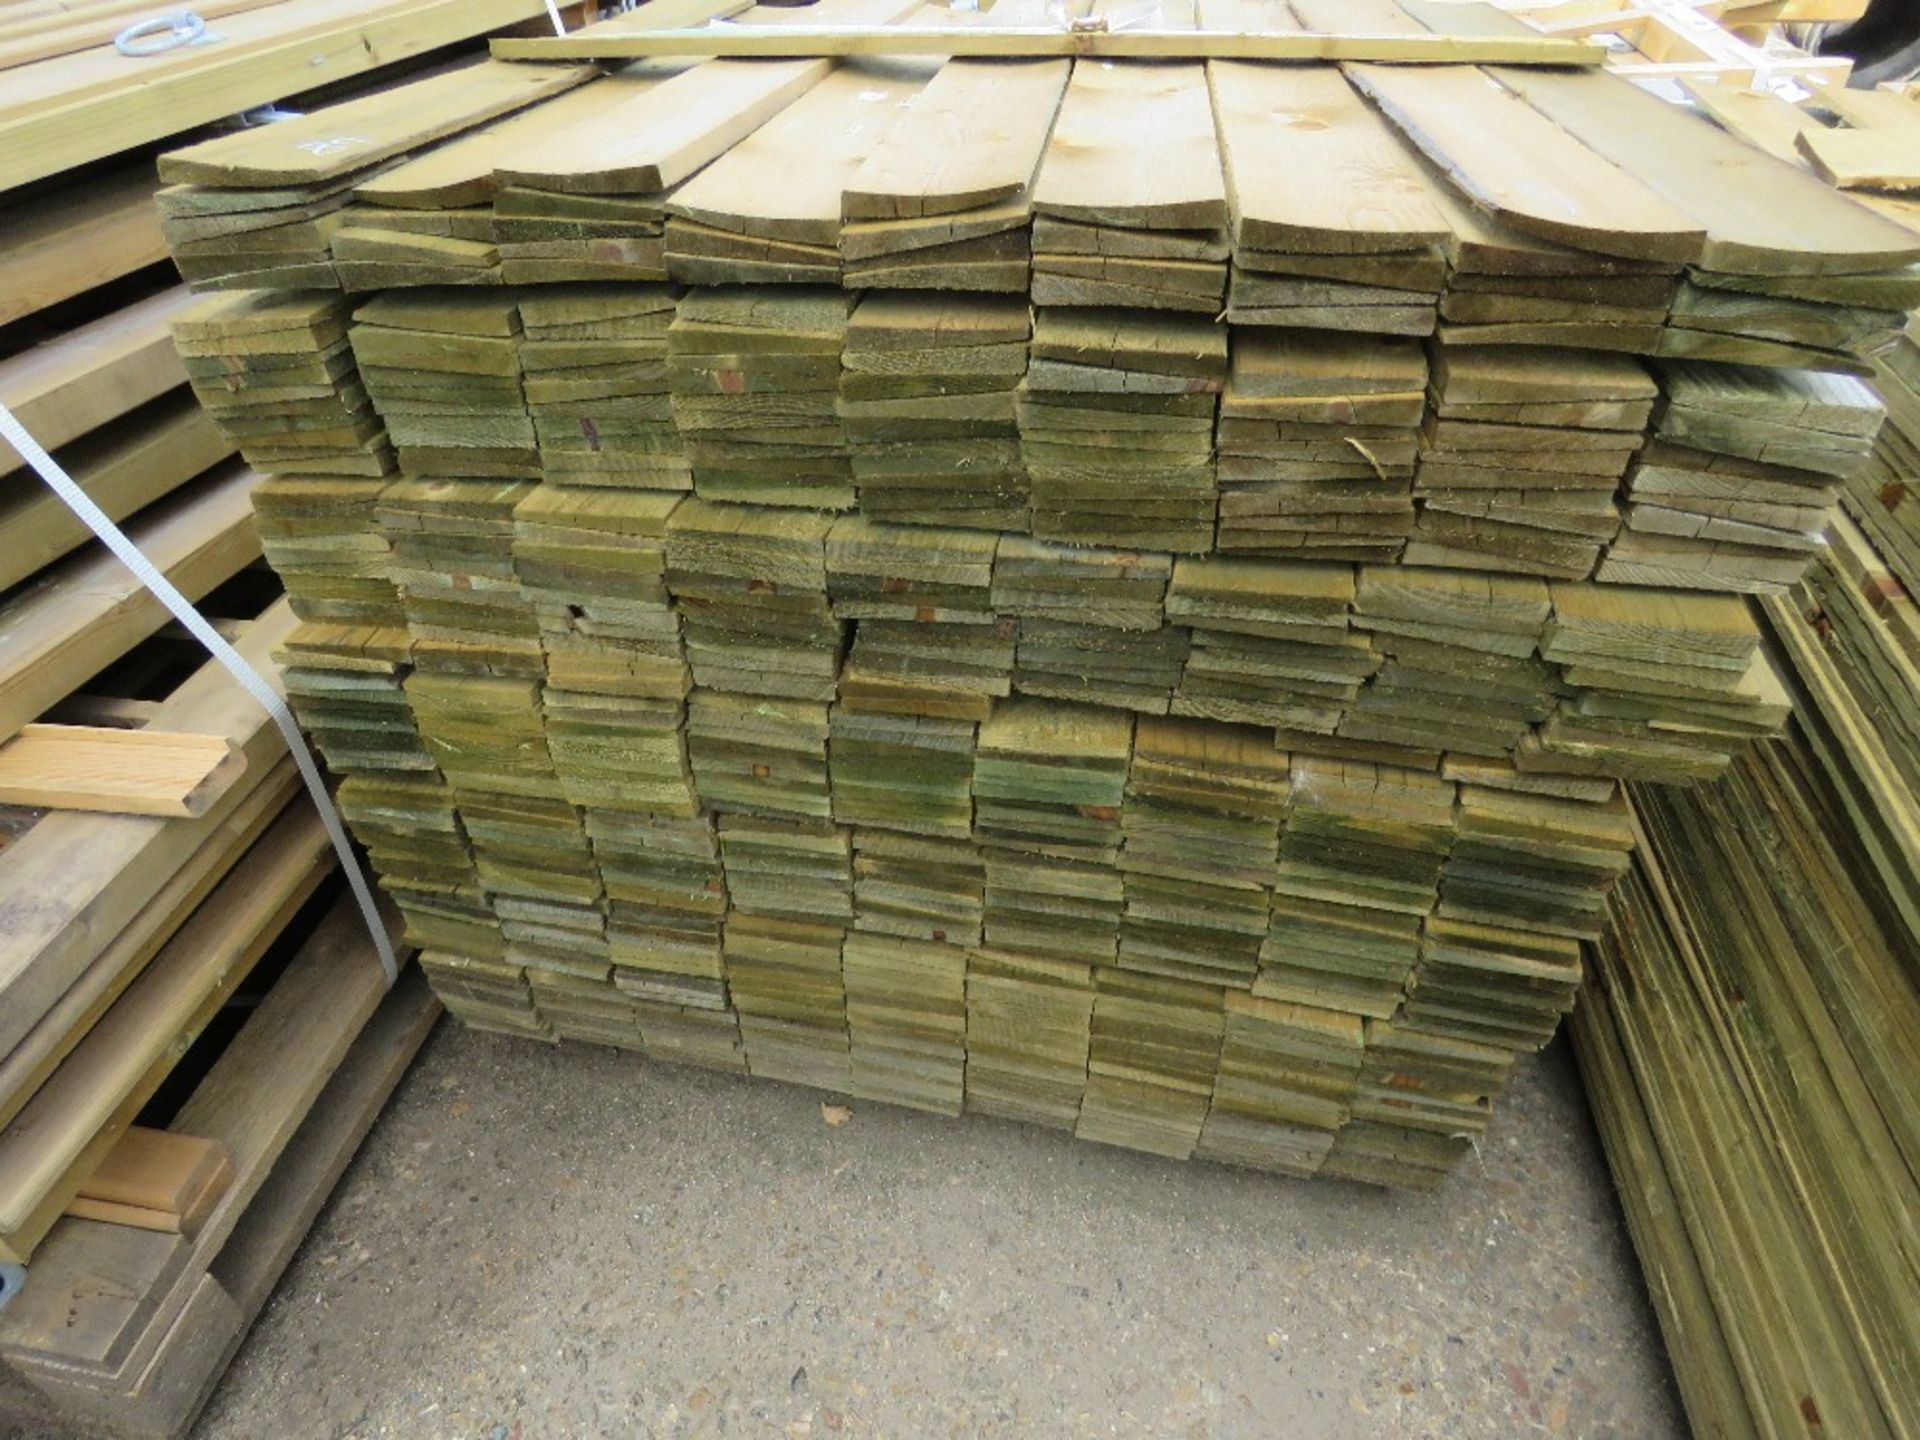 PACK OF FEATHER EDGE FENCE CLADDING TIMBER BOARDS, 0.89M LENGTH X 10CM WIDTH APPROX. - Image 2 of 3